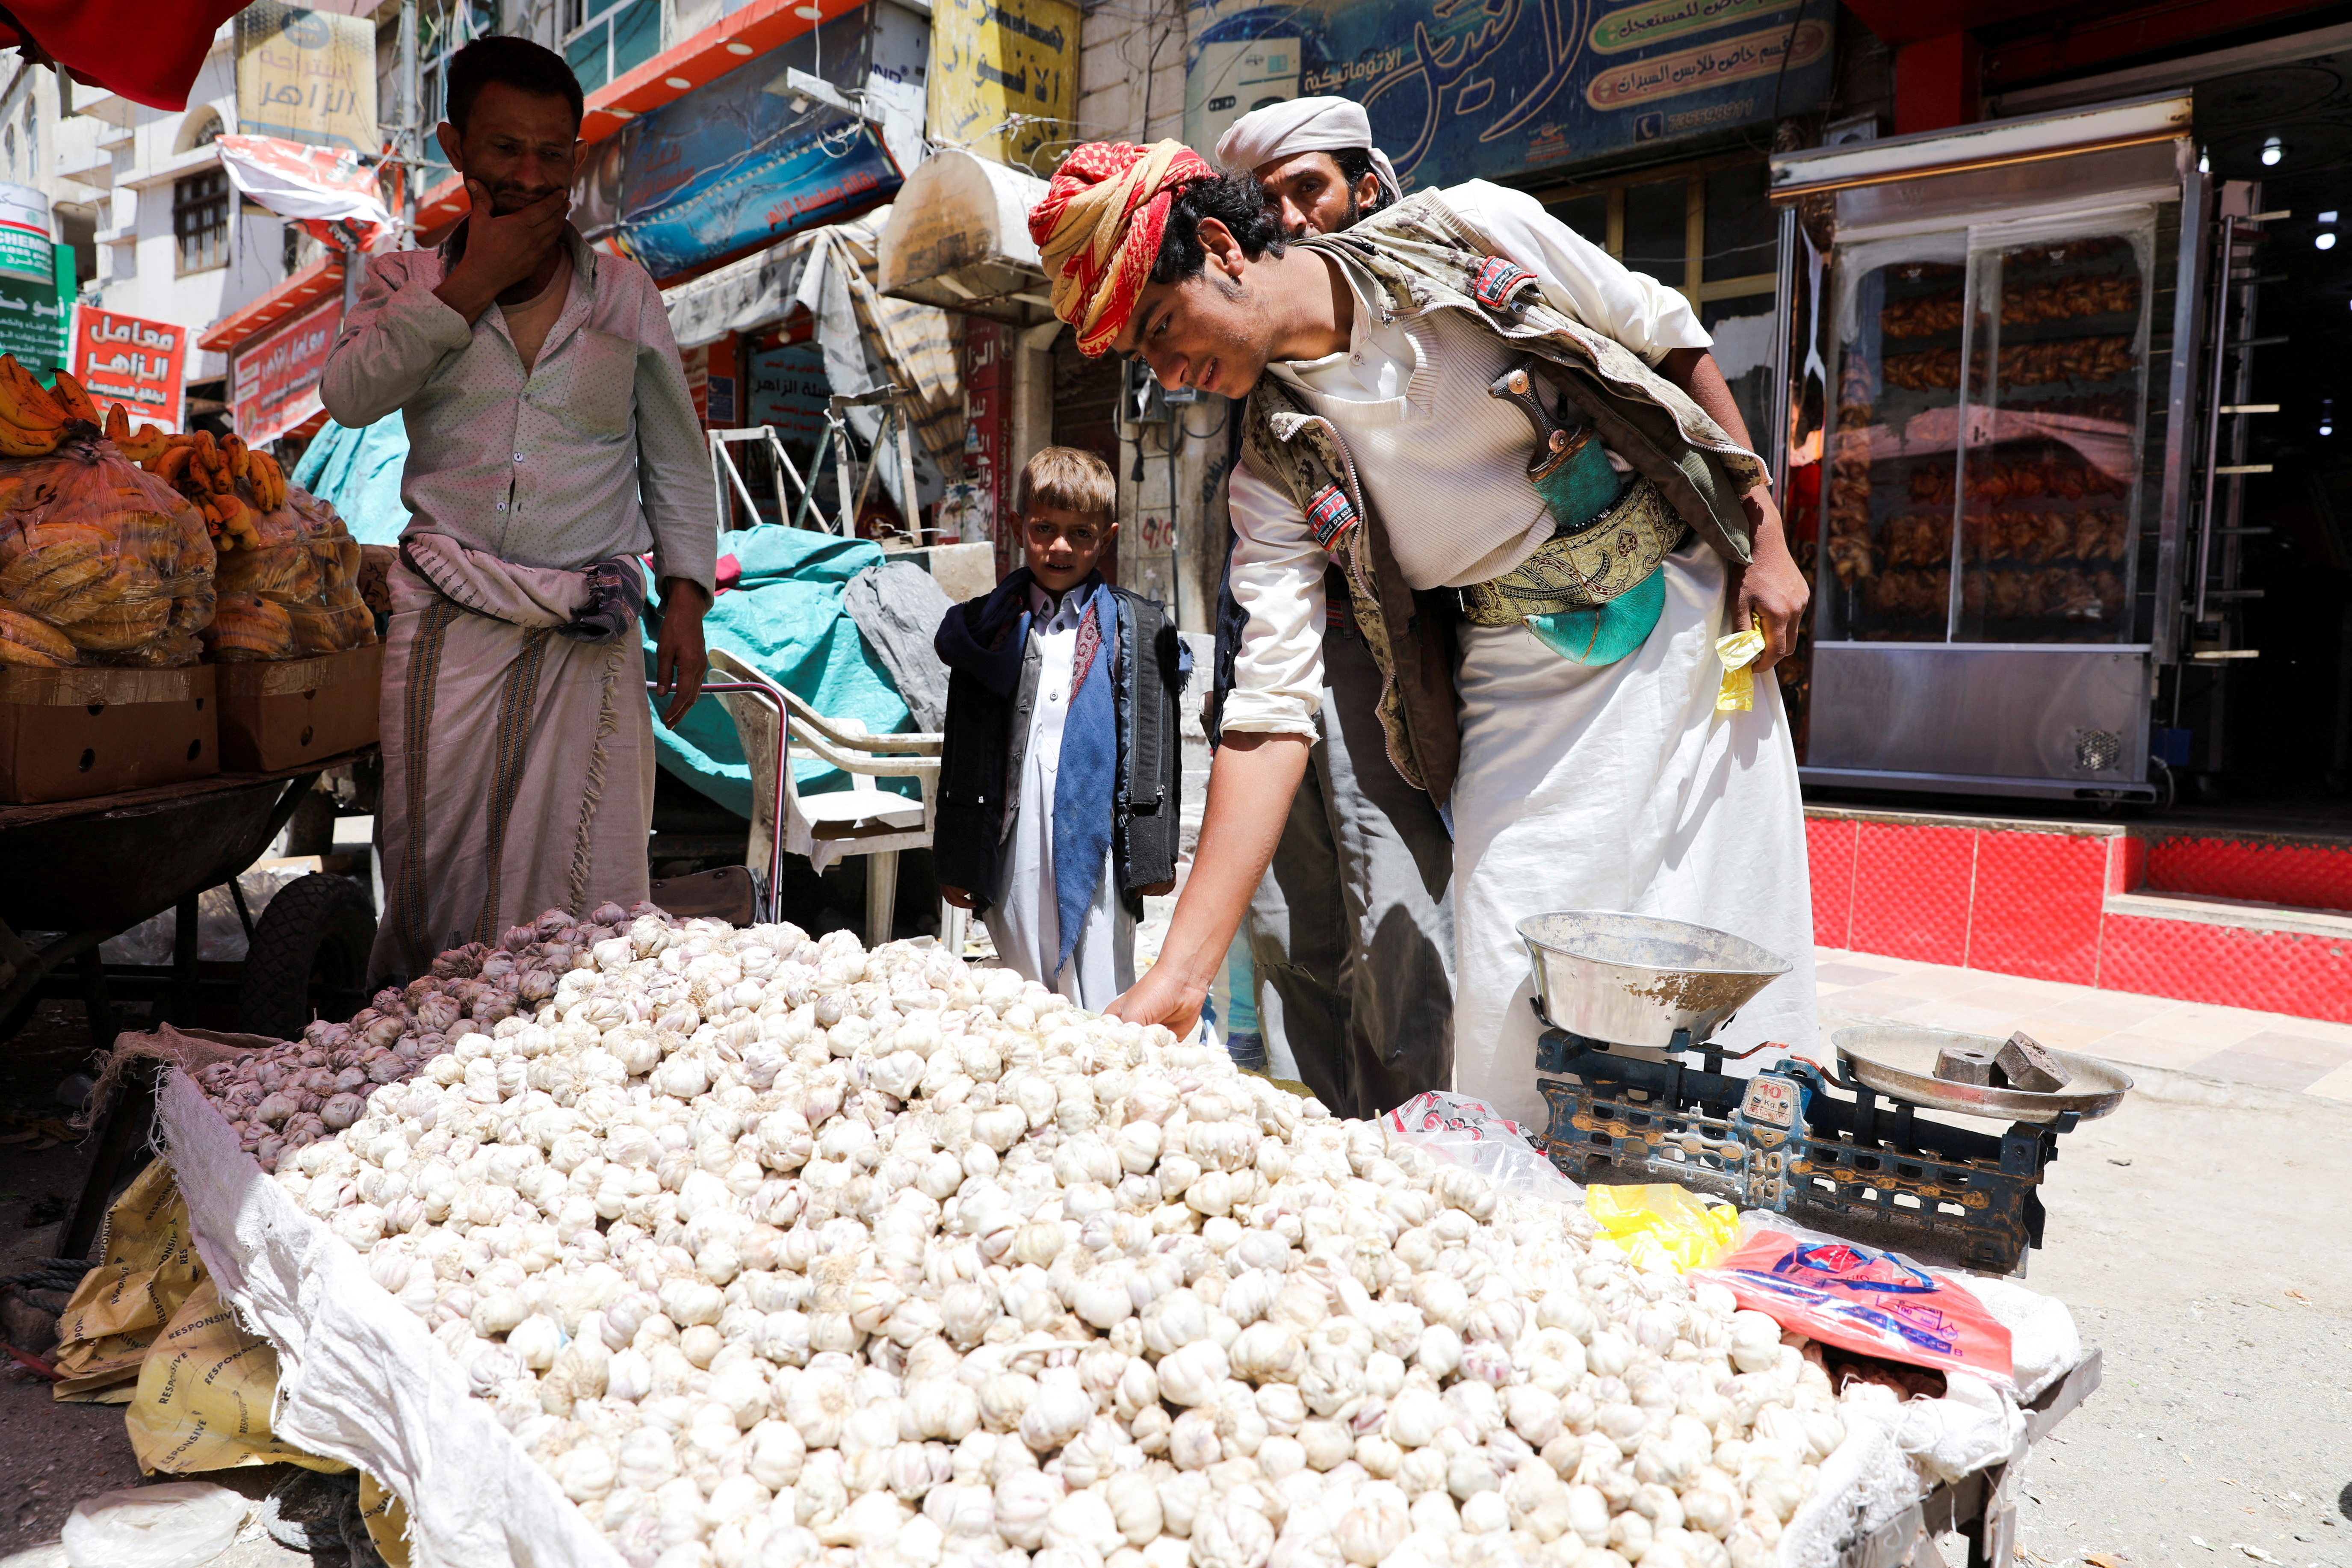 Vendors selling bread wait for customers on a street as Yemenis prepare for the fasting month of Ramadan amid war in Ukraine and soaring food prices, in Sanaa